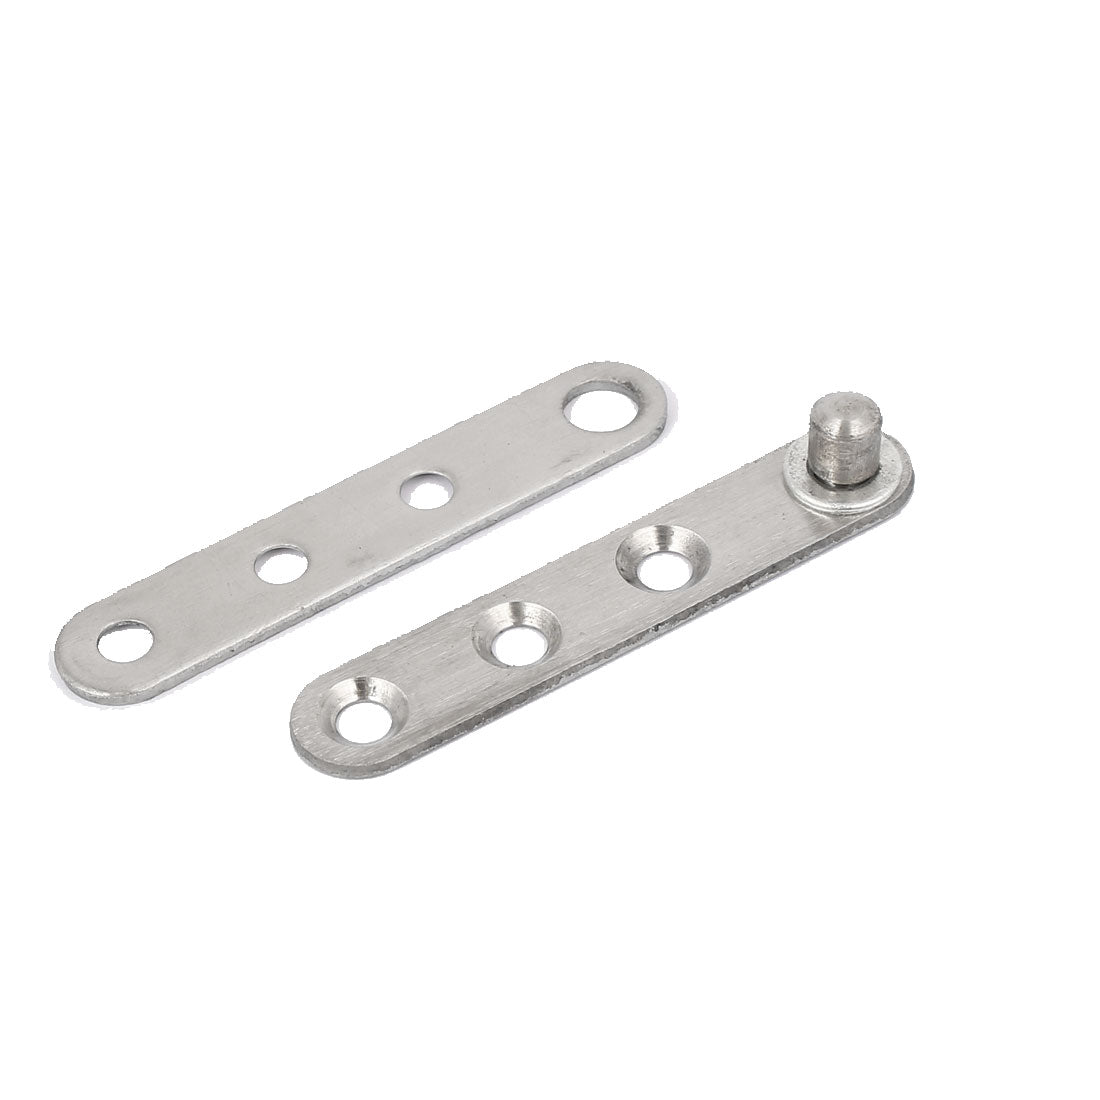 uxcell Uxcell 60mm Length Metal 360 Degree Rotatable Door Pivot Hinges Silver Tone 2 Pcs